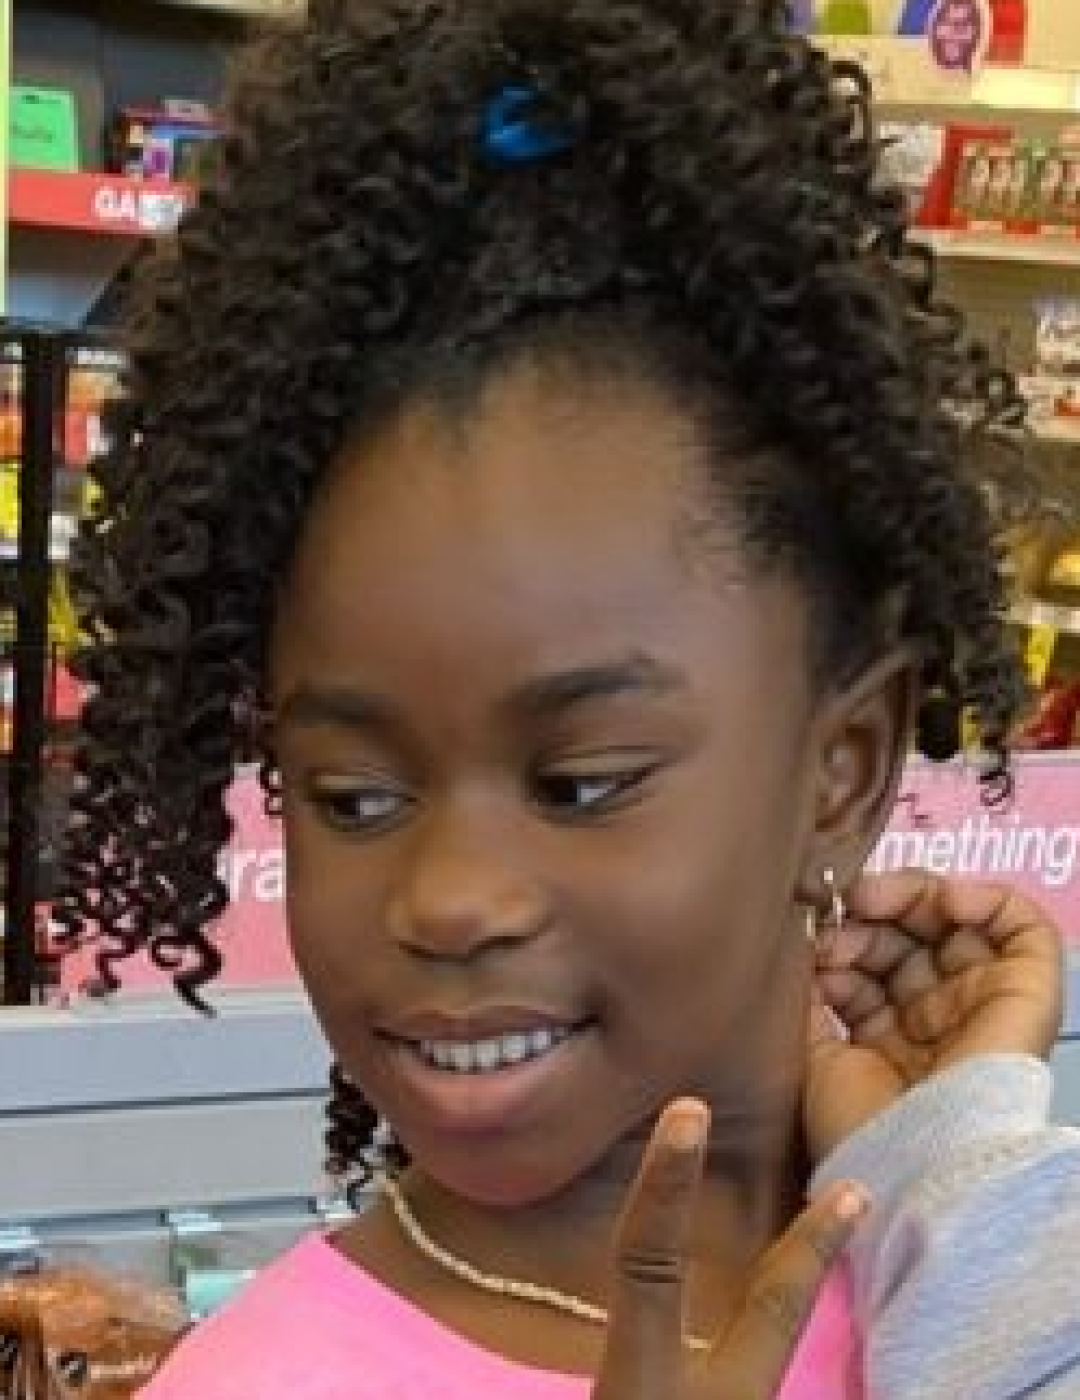 Talaya Carter. Missing child with black hair, brown eyes, and braids.